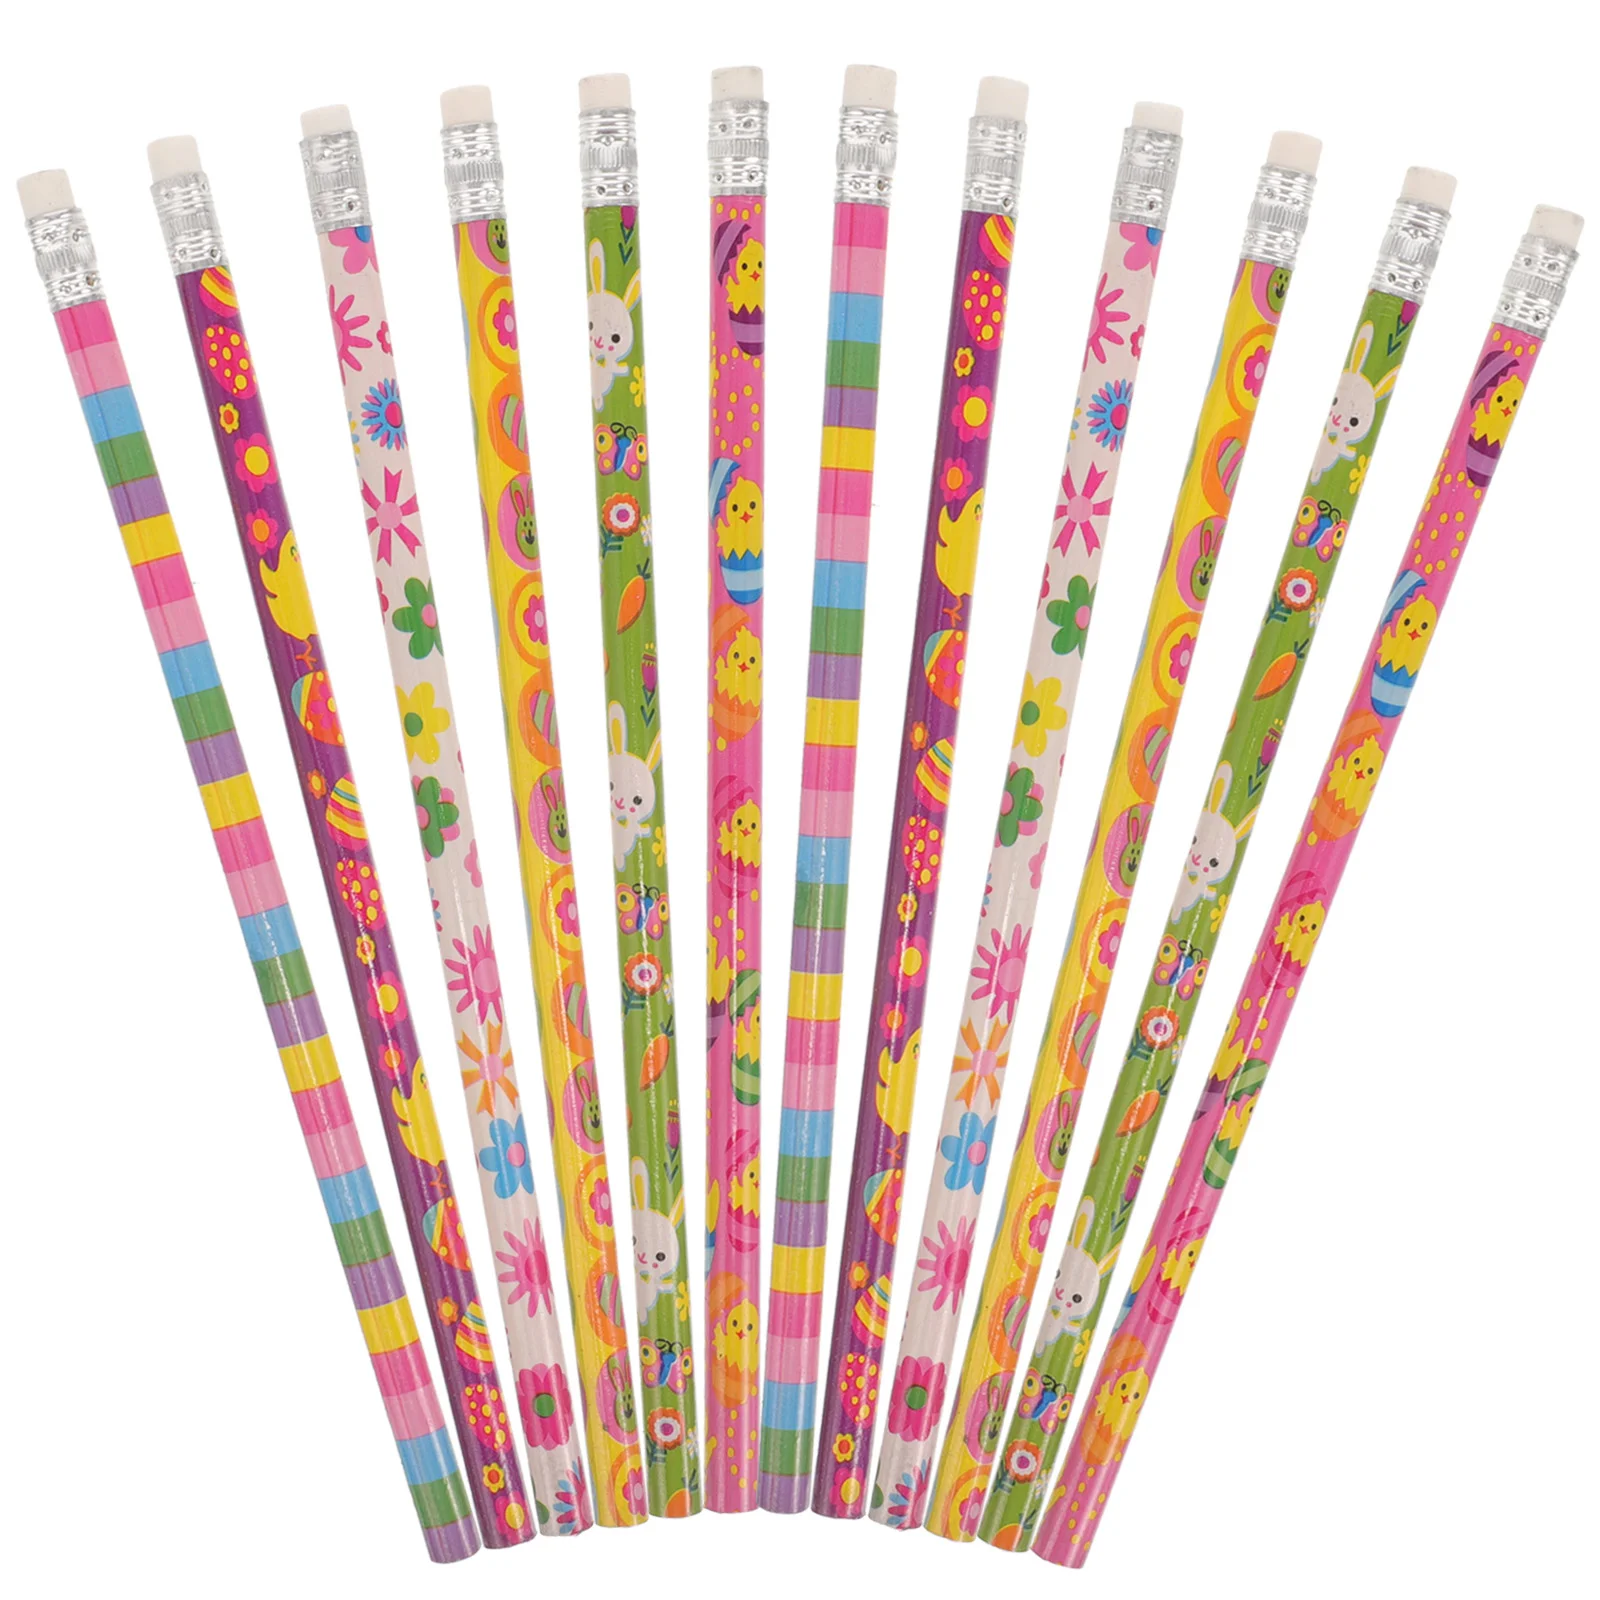 24 Pcs Easter Pencil Party Pencils Hen Portable for Bunny Bulk Painting Writing